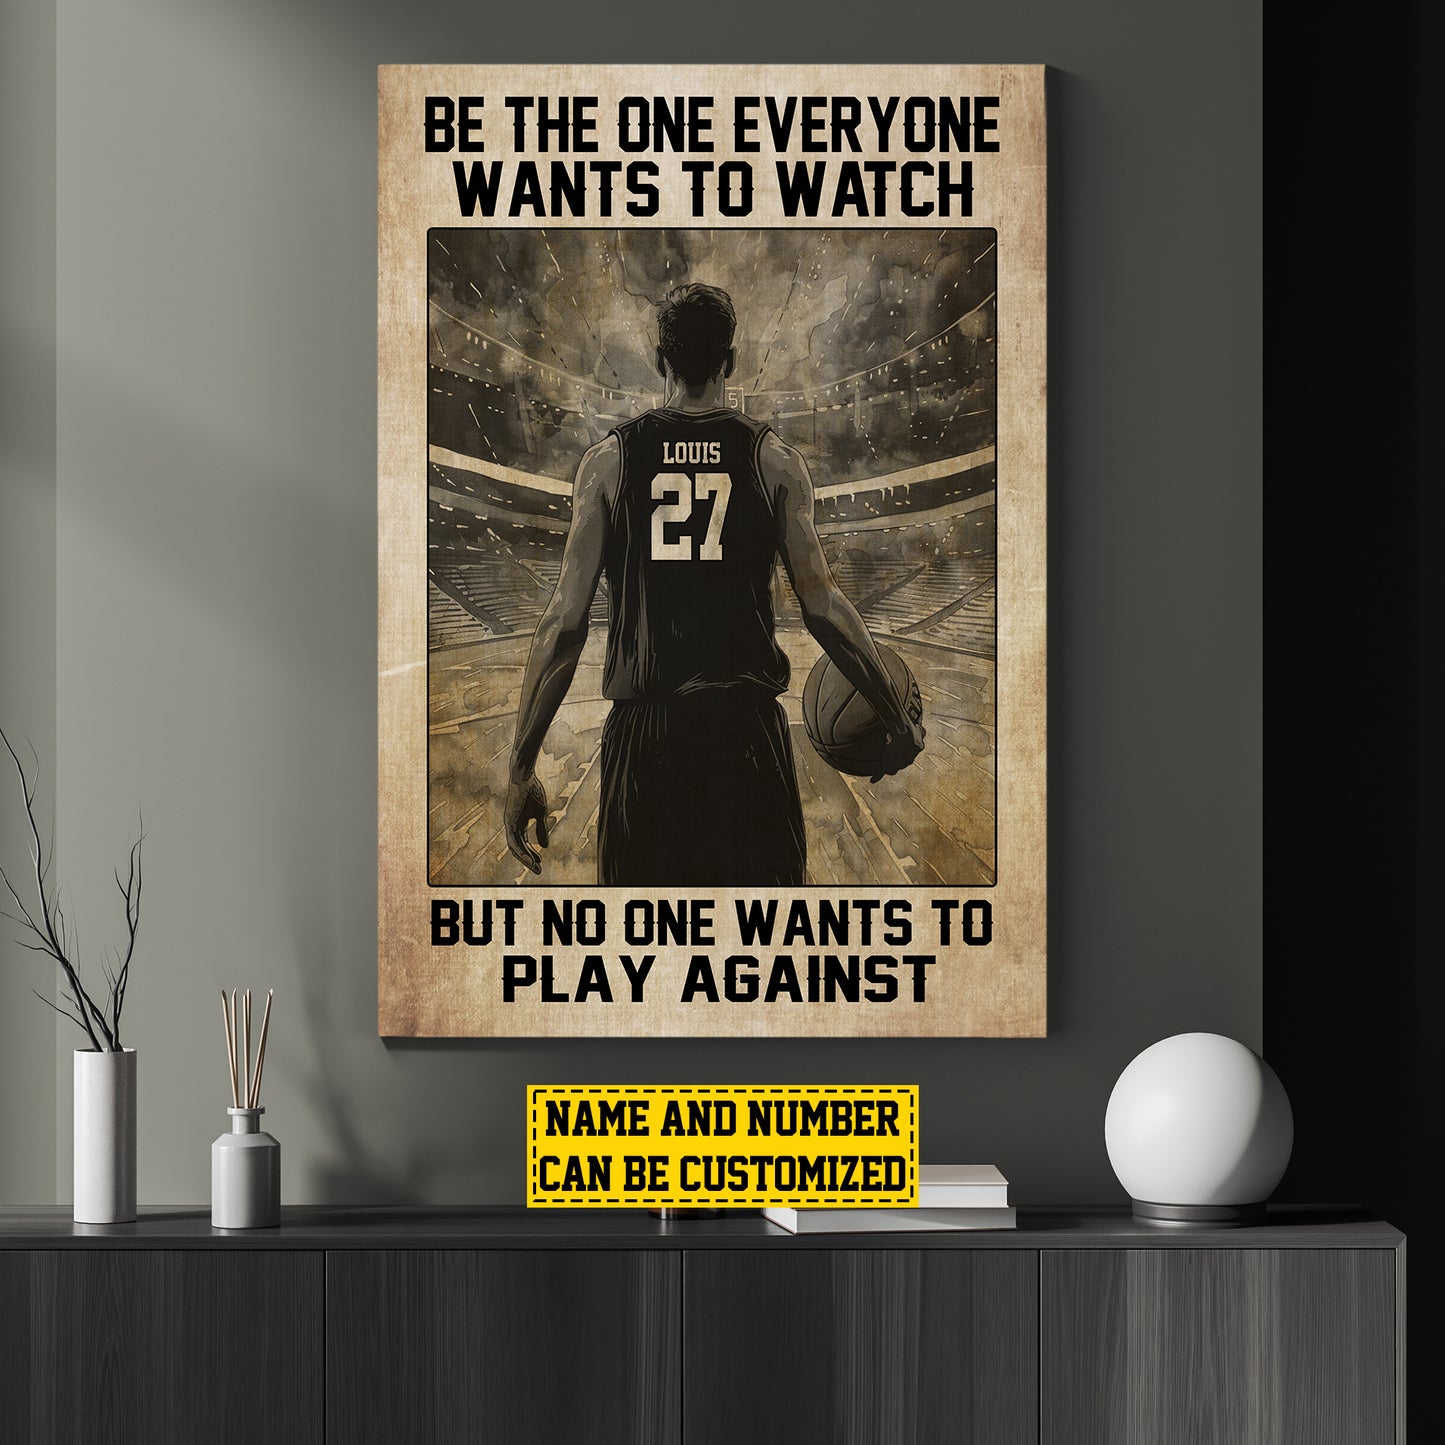 Be The One Everyone Wants To Watch, Personalized Motivational Basketball Boy Canvas Painting, Inspirational Quotes Wall Art Decor, Gift For Basketball Boy Lovers, Basketball Players